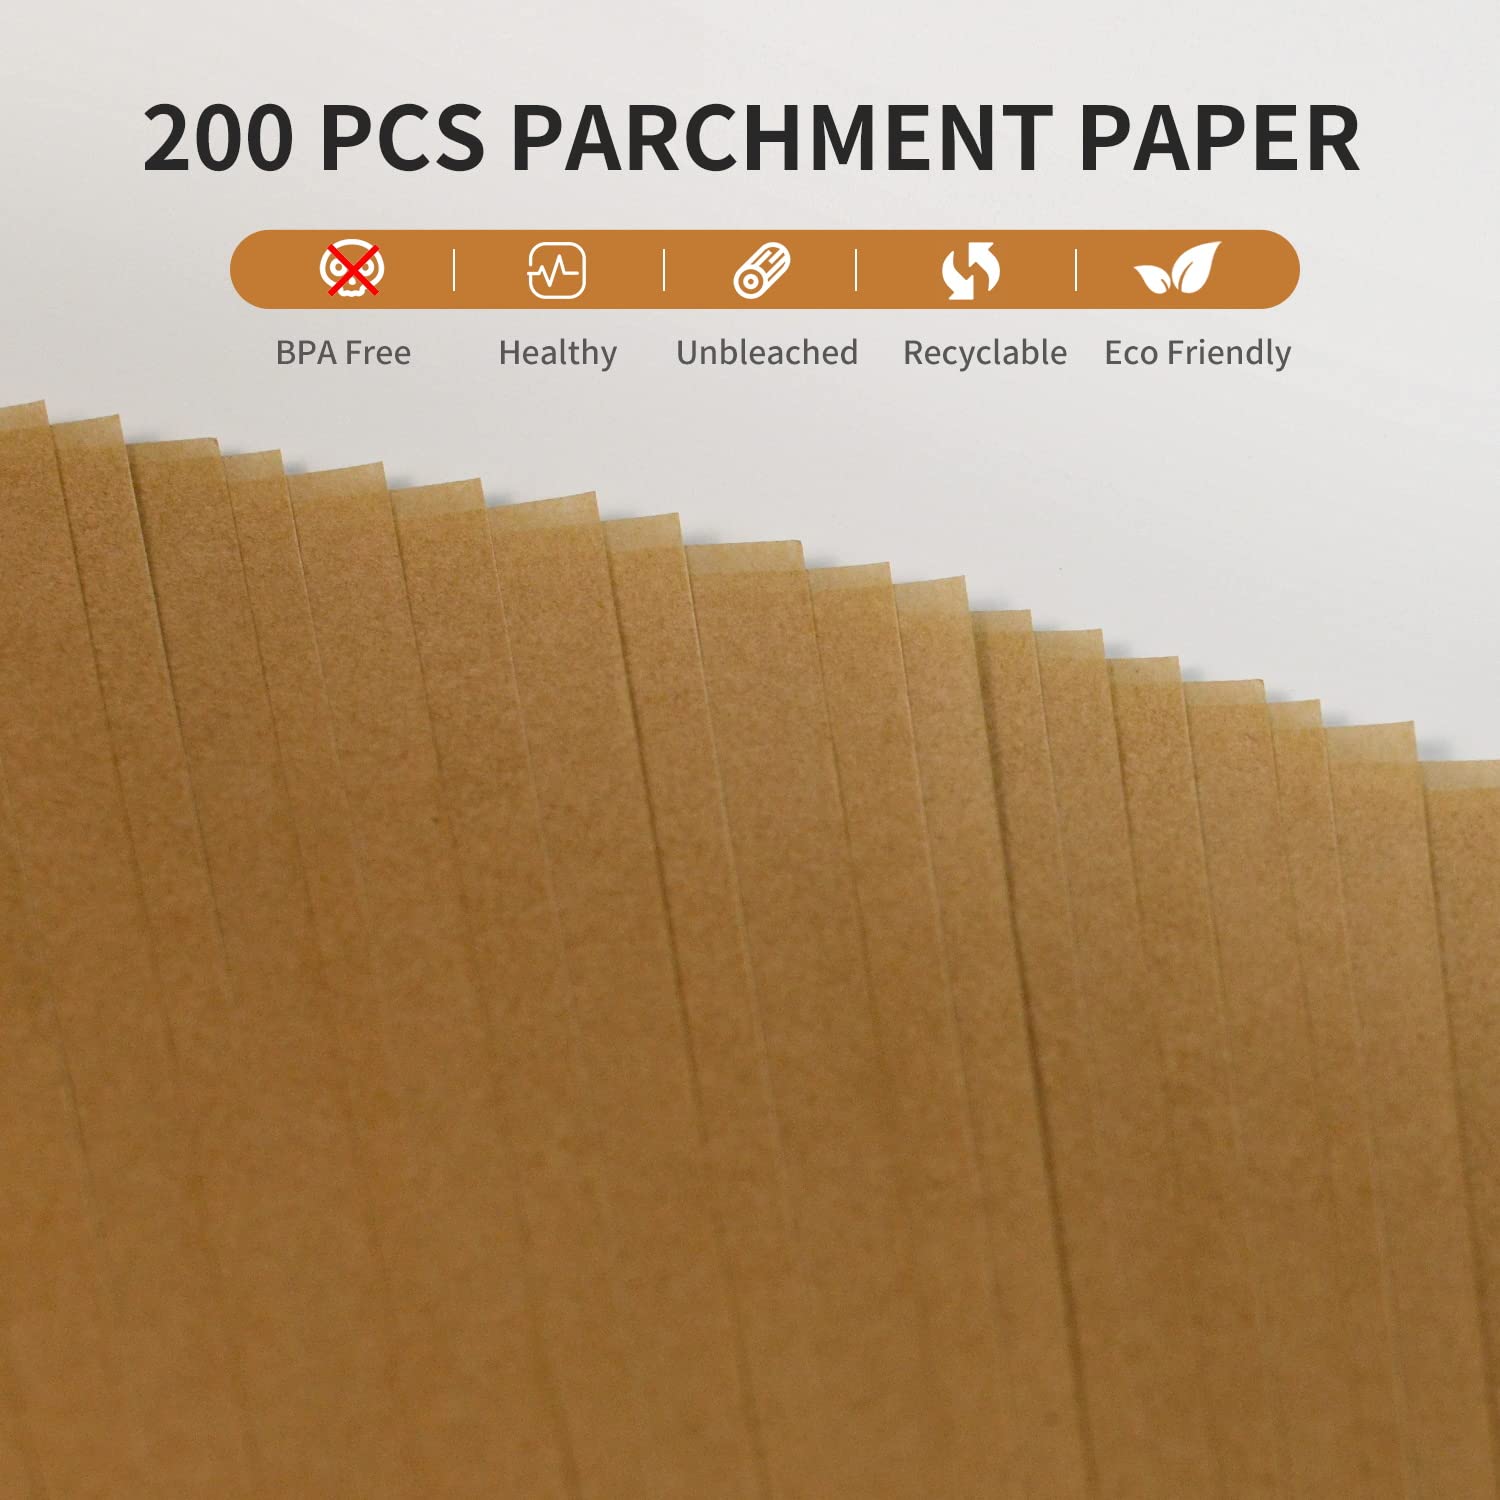 200 Pcs Parchment Paper Baking Sheets, 12x16 Inch Baking Paper, Precut Non-Stick Parchment Sheets for Baking, Cooking, Grilling, Air Fryer and Steaming, Precut Silicone baking paper